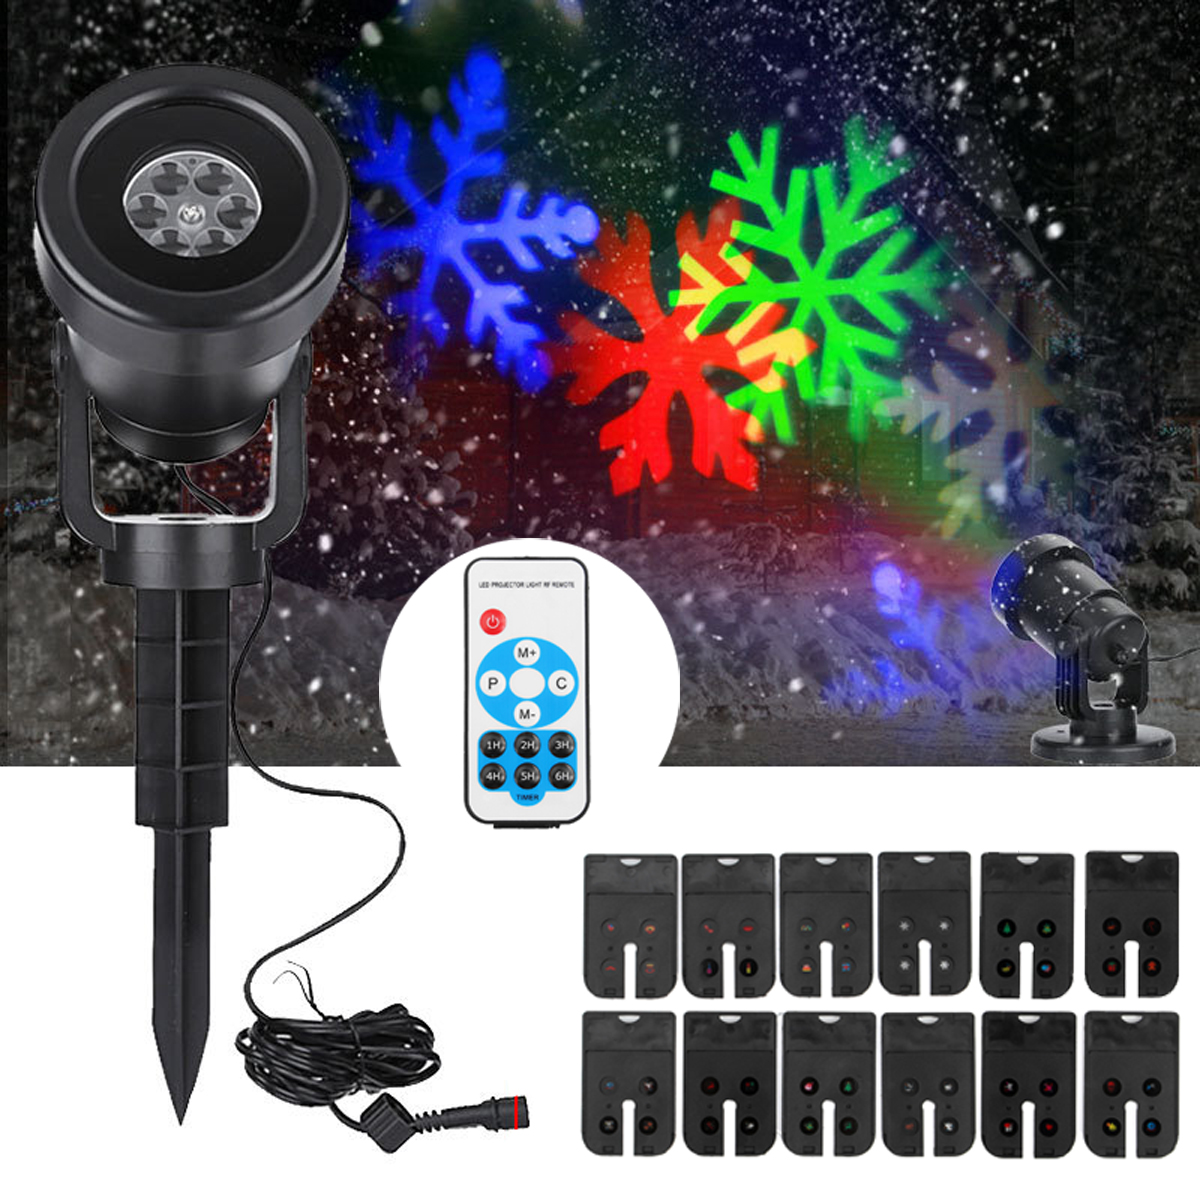 Find 12 Patterns LED Waterproof Landscape Moving Stage Light Projector for Chrismas Halloween for Sale on Gipsybee.com with cryptocurrencies